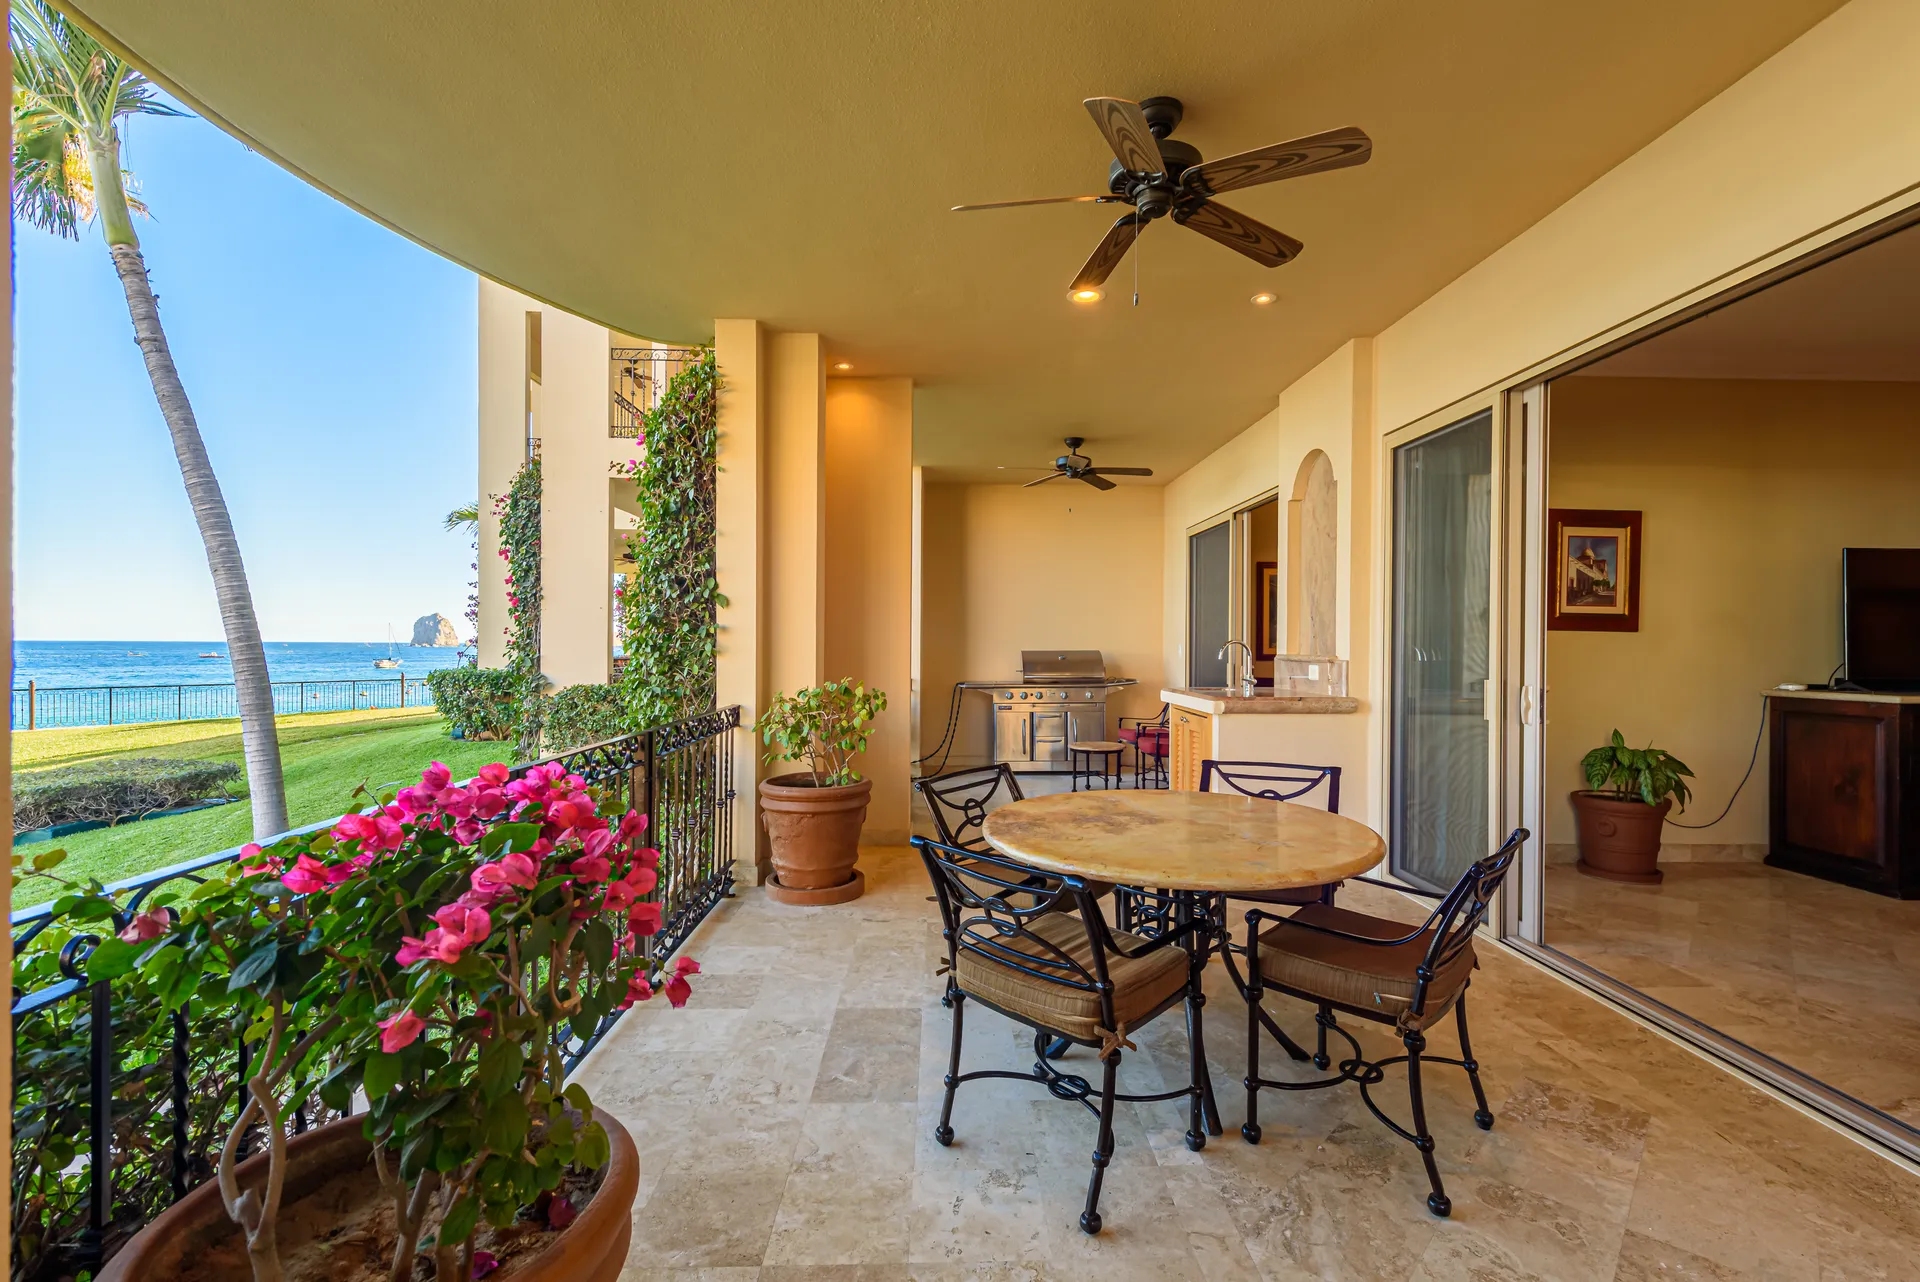 This ground floor 3BR/4BA ocean front villa has the most incredible views from the over 600 sq. ft. of terrace, with dramatic views of the Sea of Cortez.